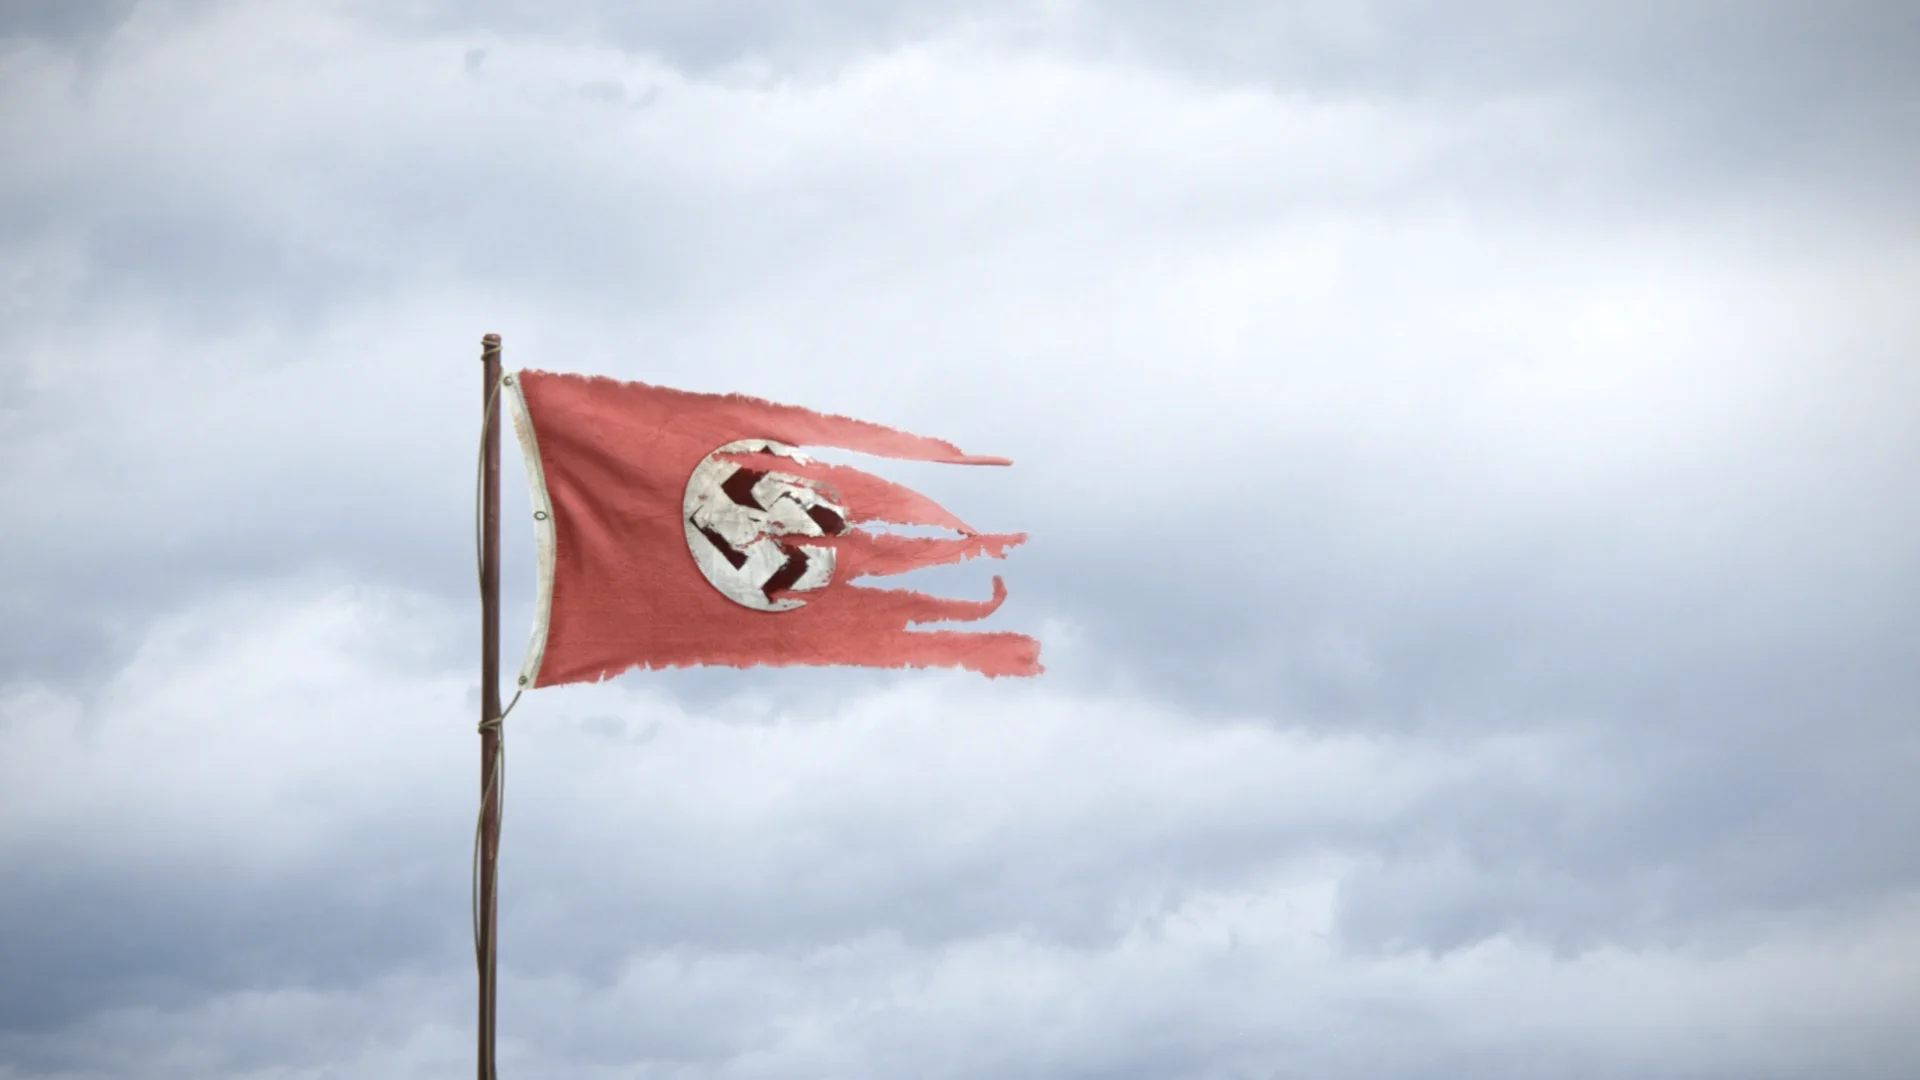 For the very first tease announcing the return of The Man in the High Castle, we partnered up with Amazon Studios to create an original flag concept that would set the tone for the highly anticipated new season. 